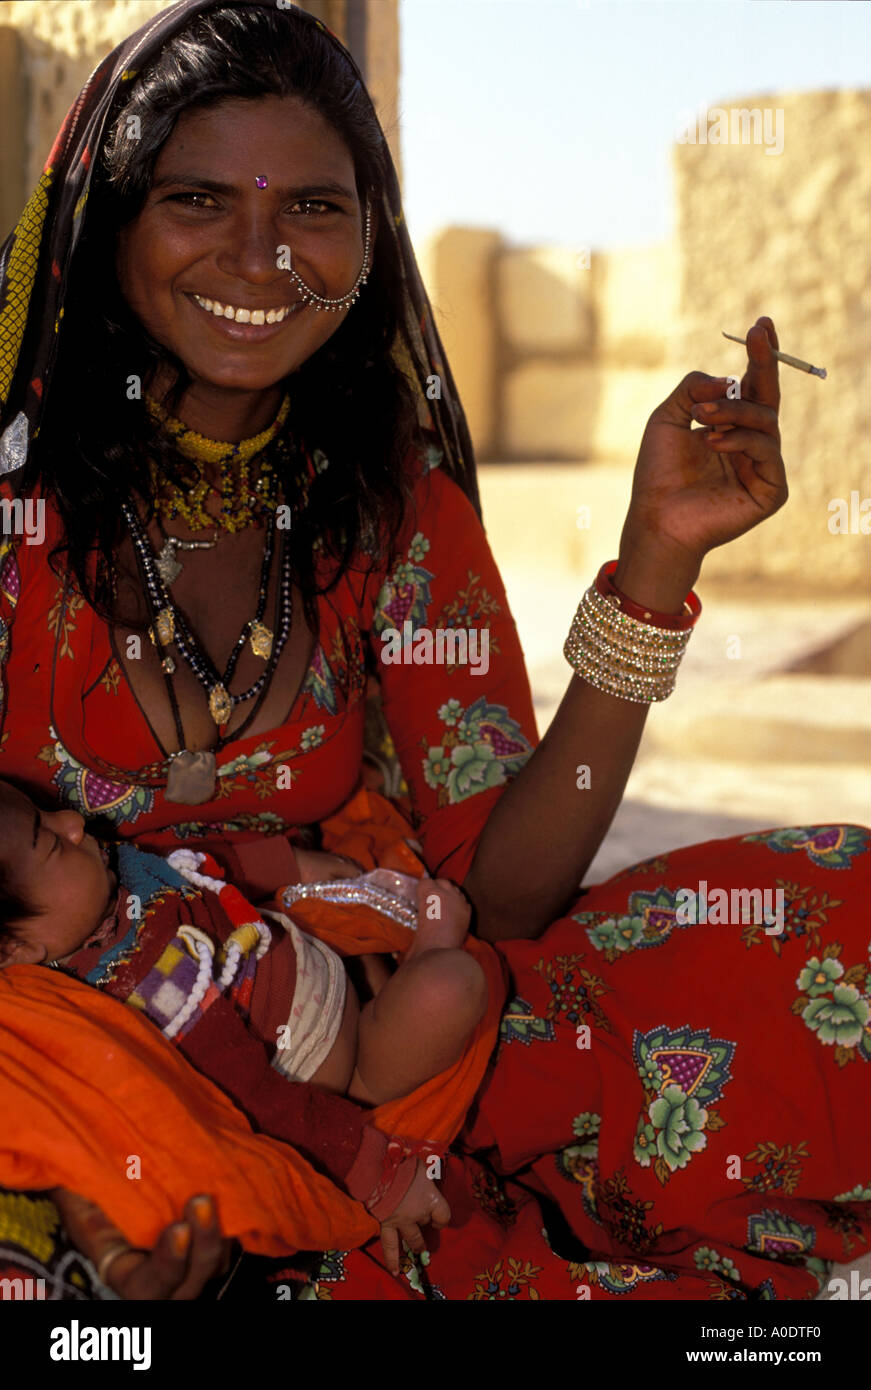 A Bopa gypsy nomadic mother and holding her baby Indigenous cultures and native tribes of Rajasthan Jaisalmer India Stock Photo